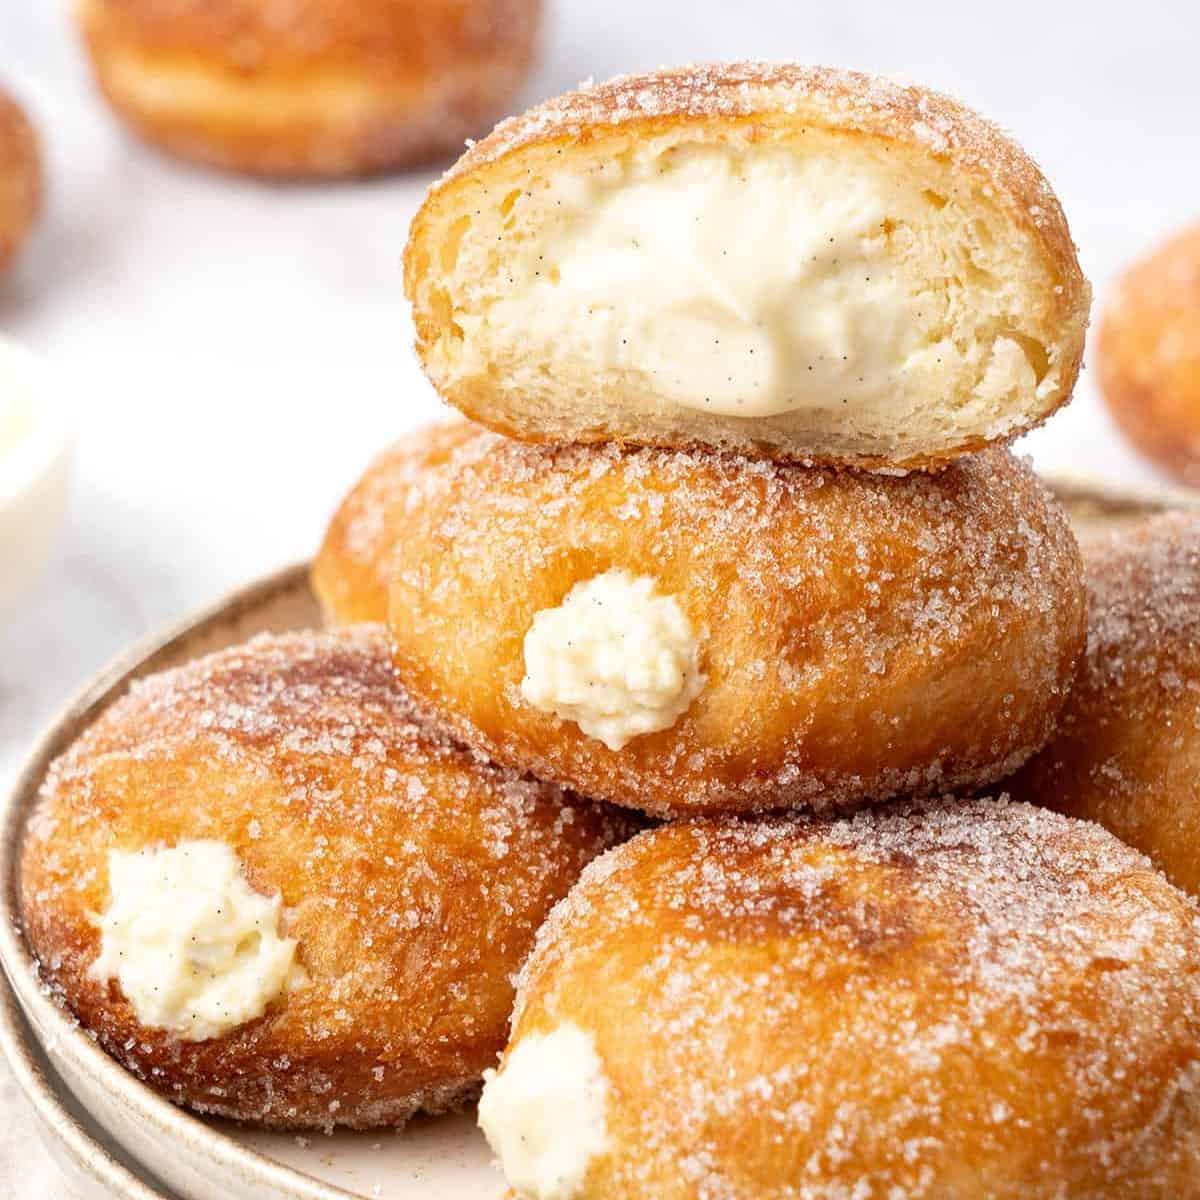 Bavarian cream donut with cream filling showing